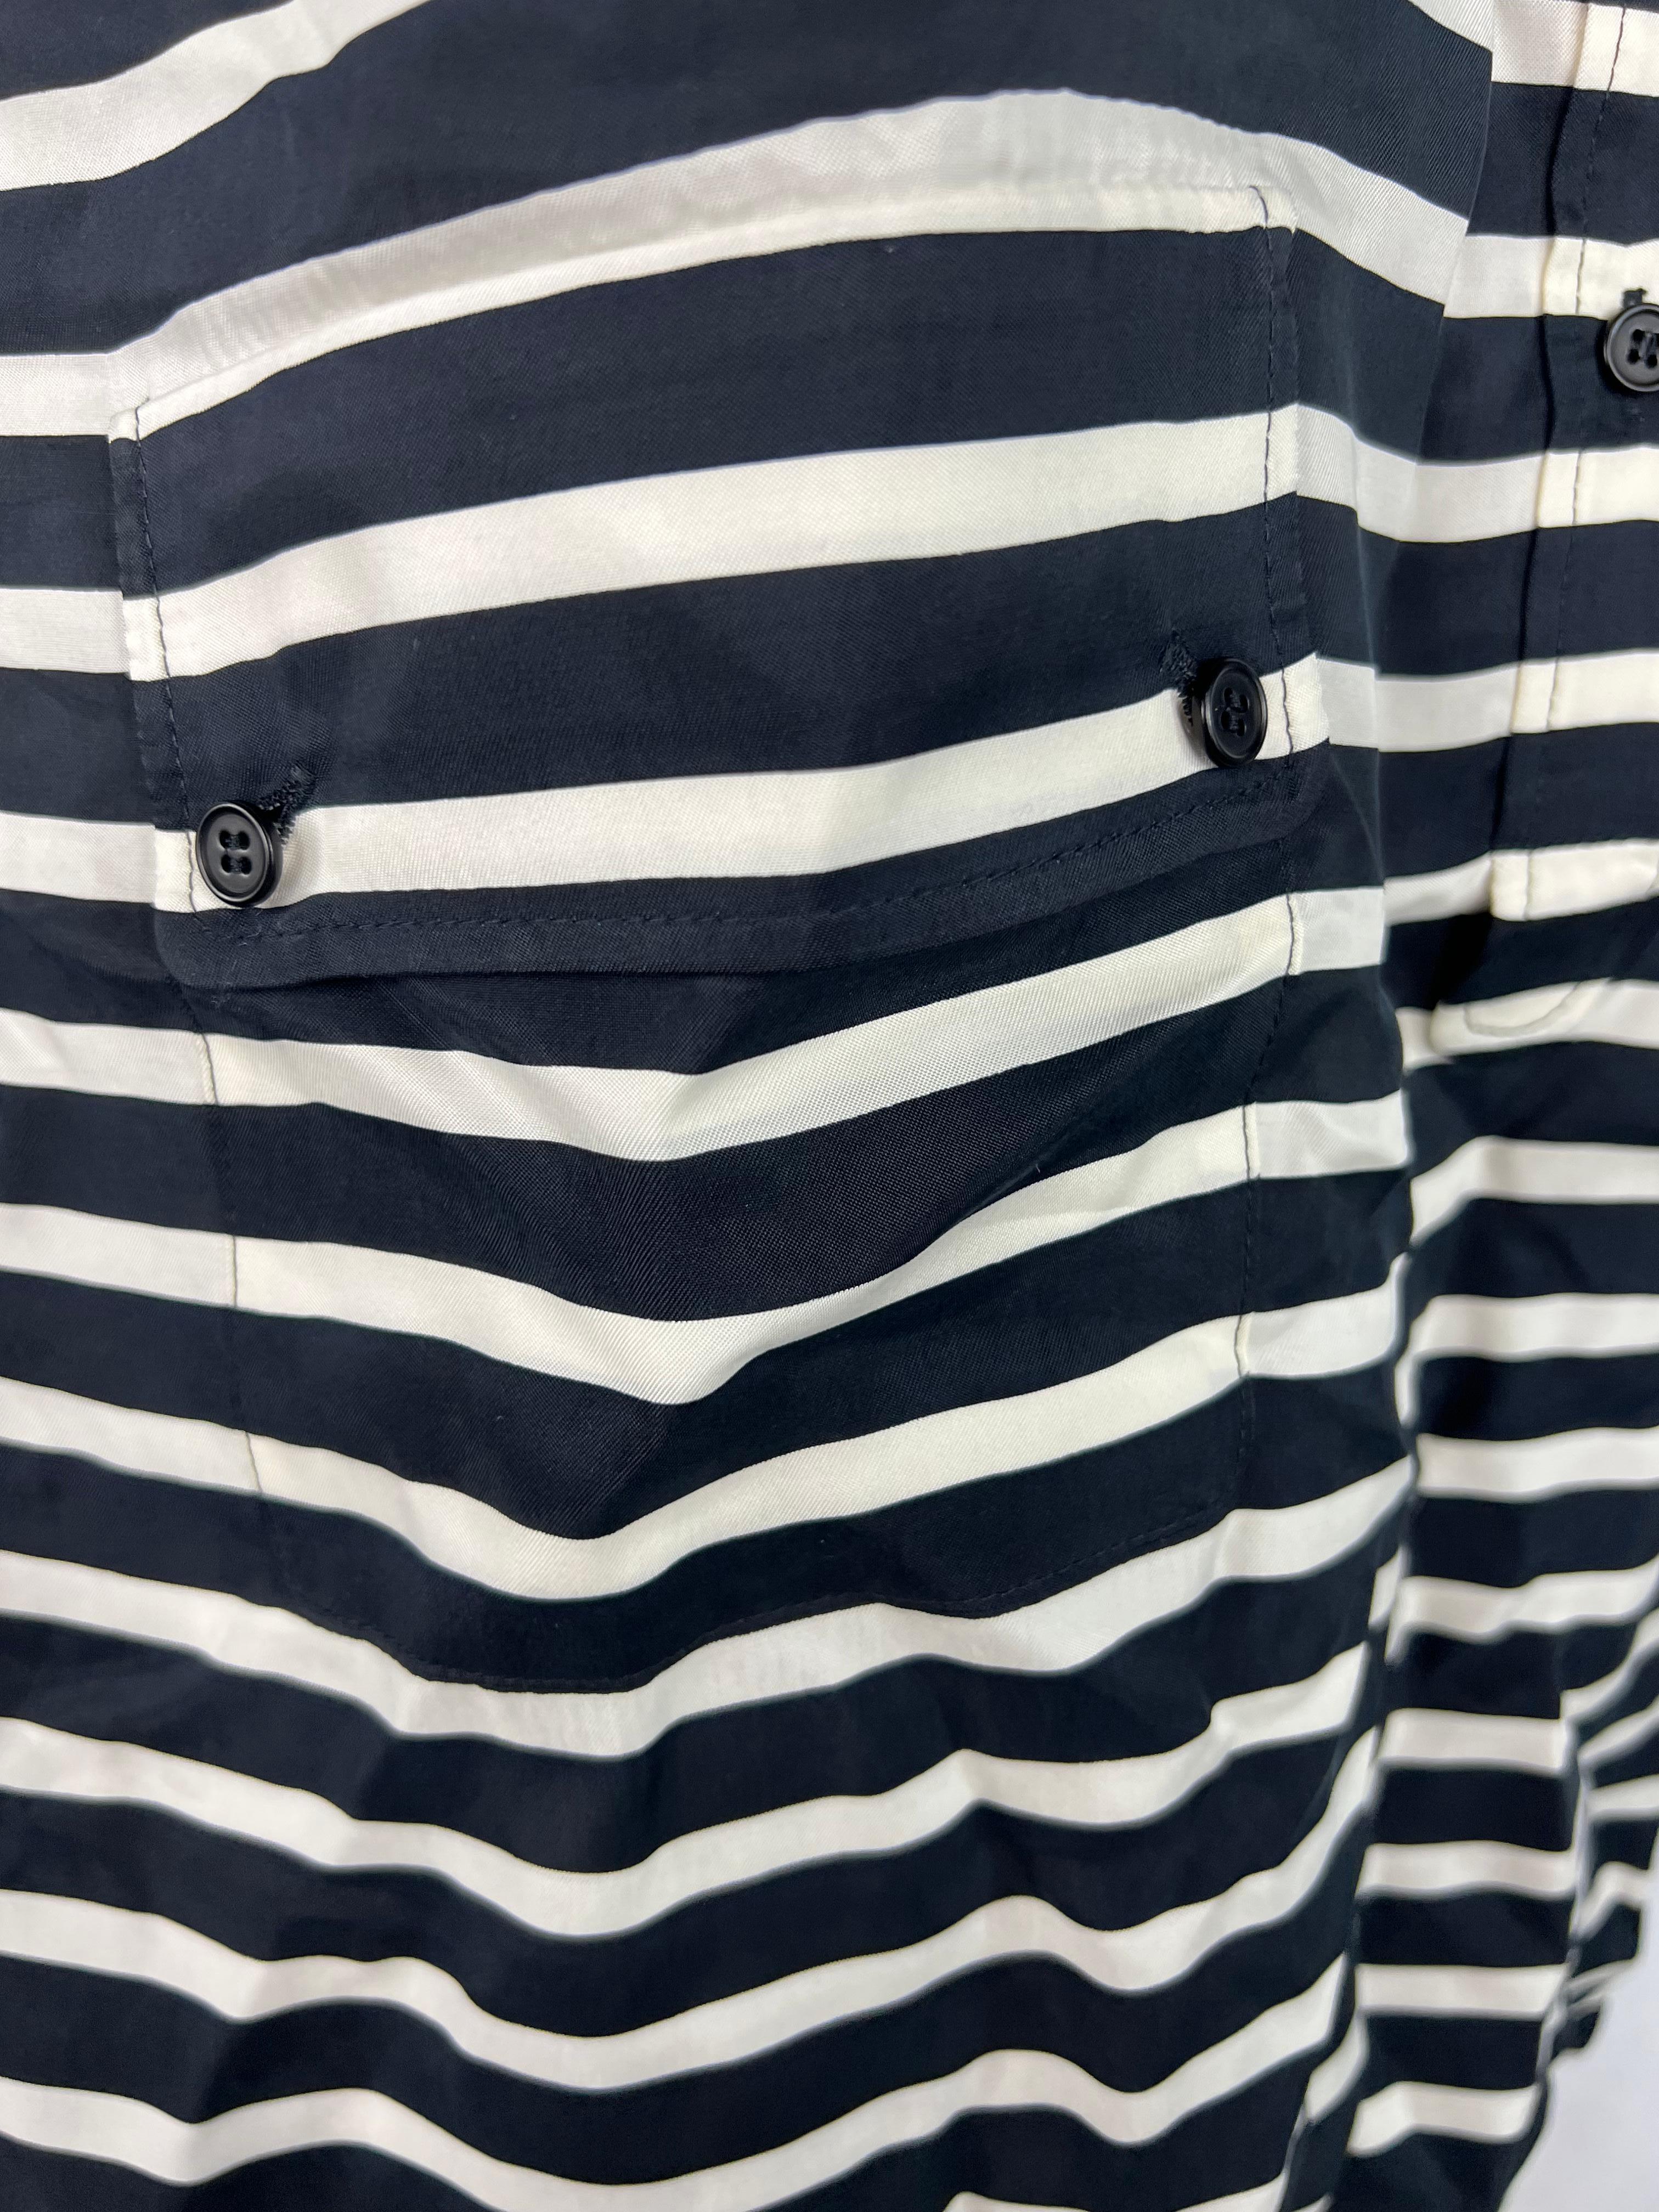 Product details:

The shirt features navy and white striped pattern with front half button closure, front dual pockets detail.